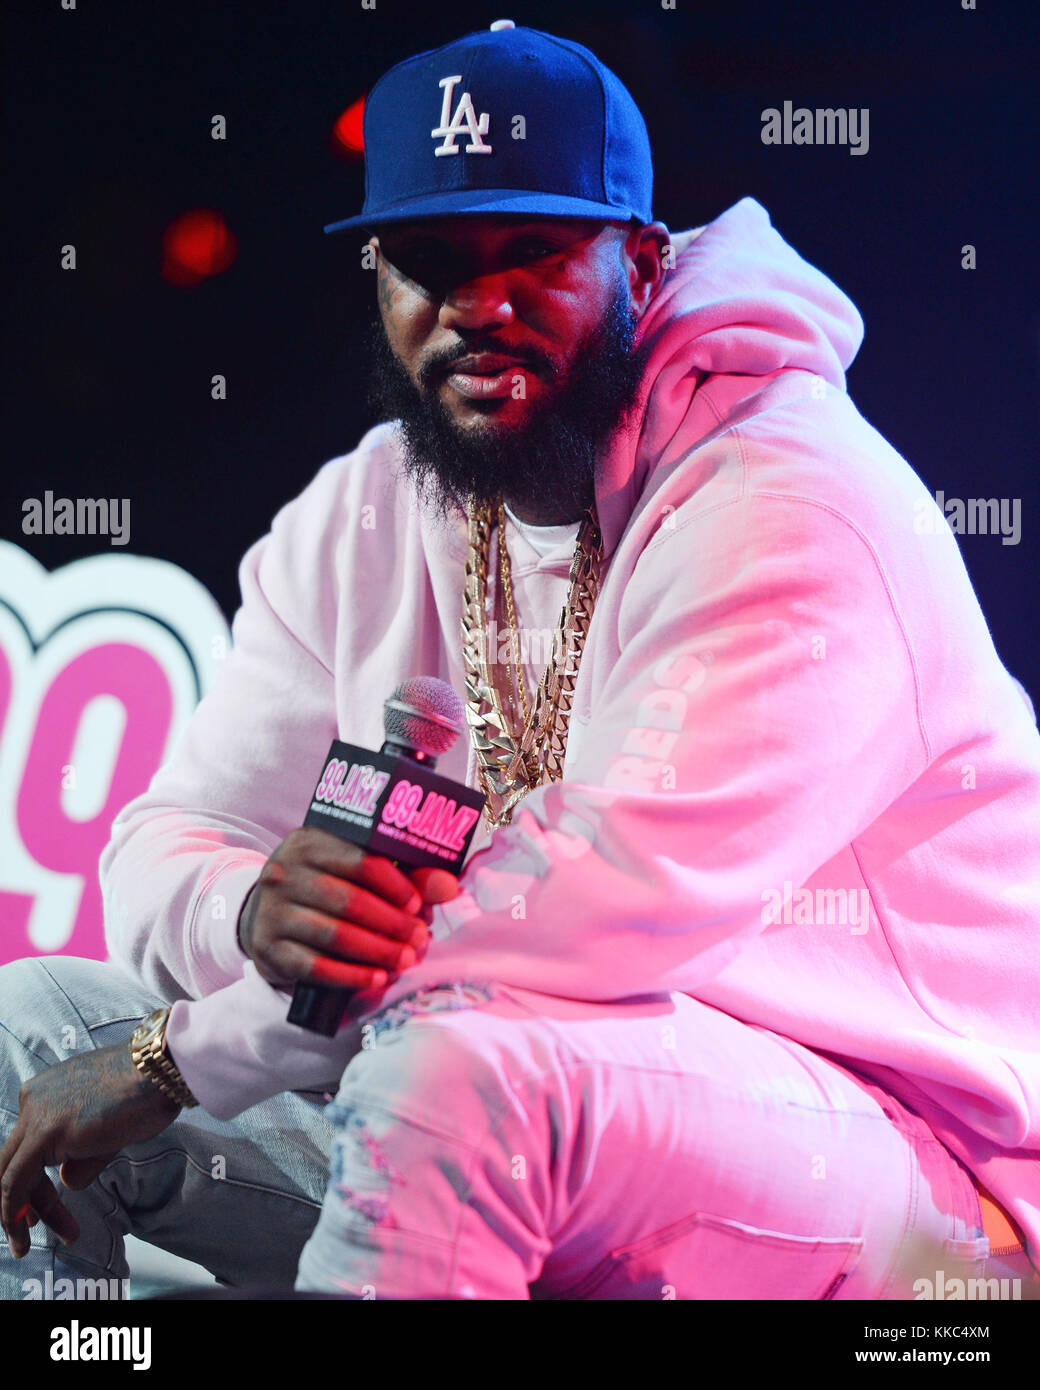 FORT LAUDERDALE, FL - SEPTEMBER 14: Jayceon Terrell Taylor, better known by his stage name The Game at 99 Jamz UnCensored Session at Revolution on September 14, 2016 in Fort Lauderdale, Florida.   People:  The Game Stock Photo